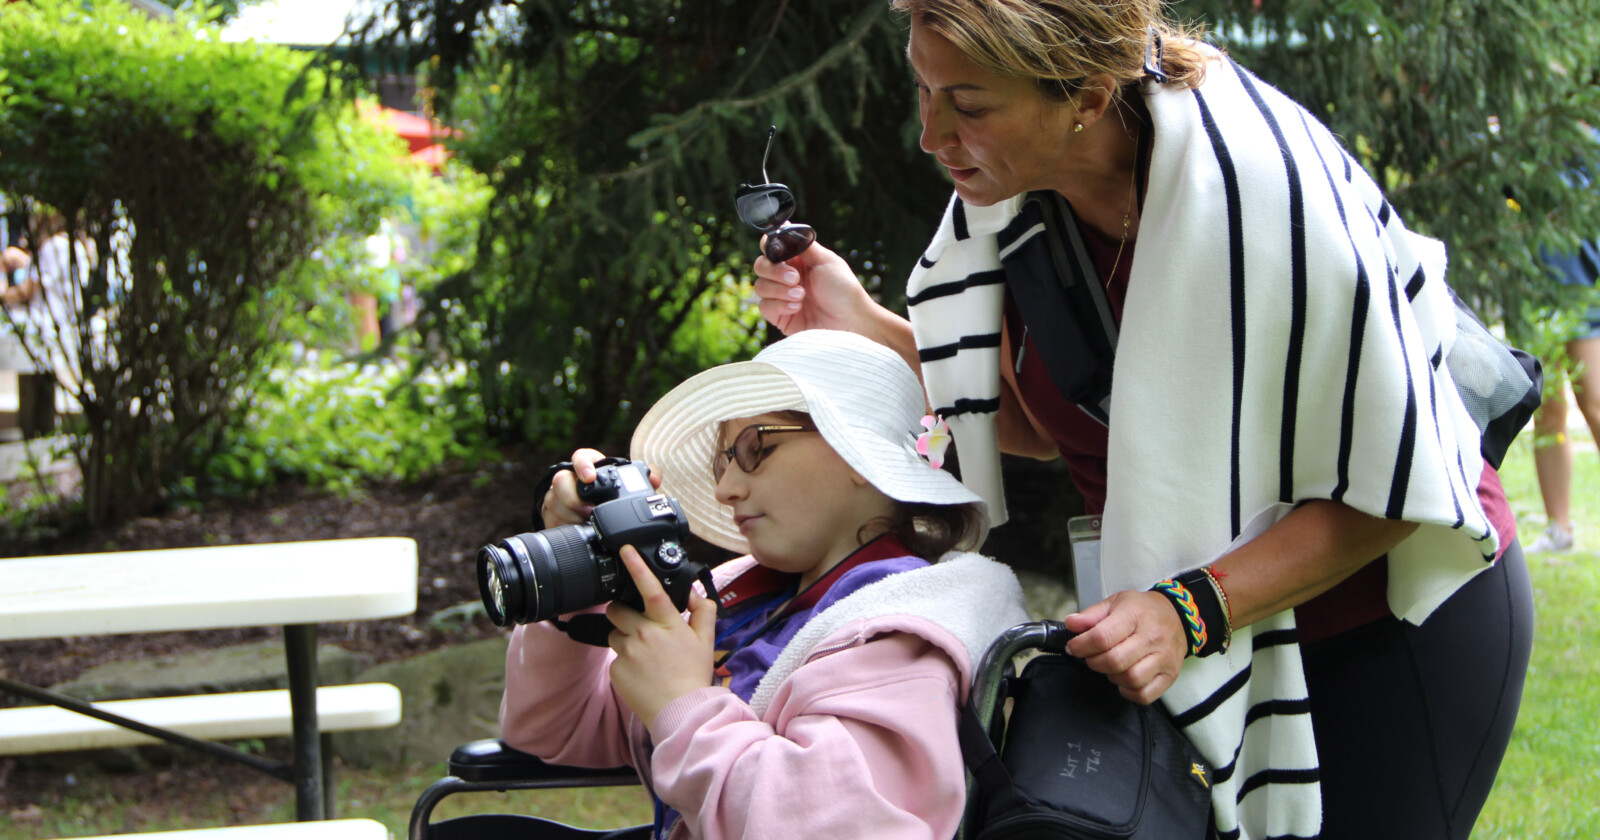  canon helps sick children express themselves through photography 